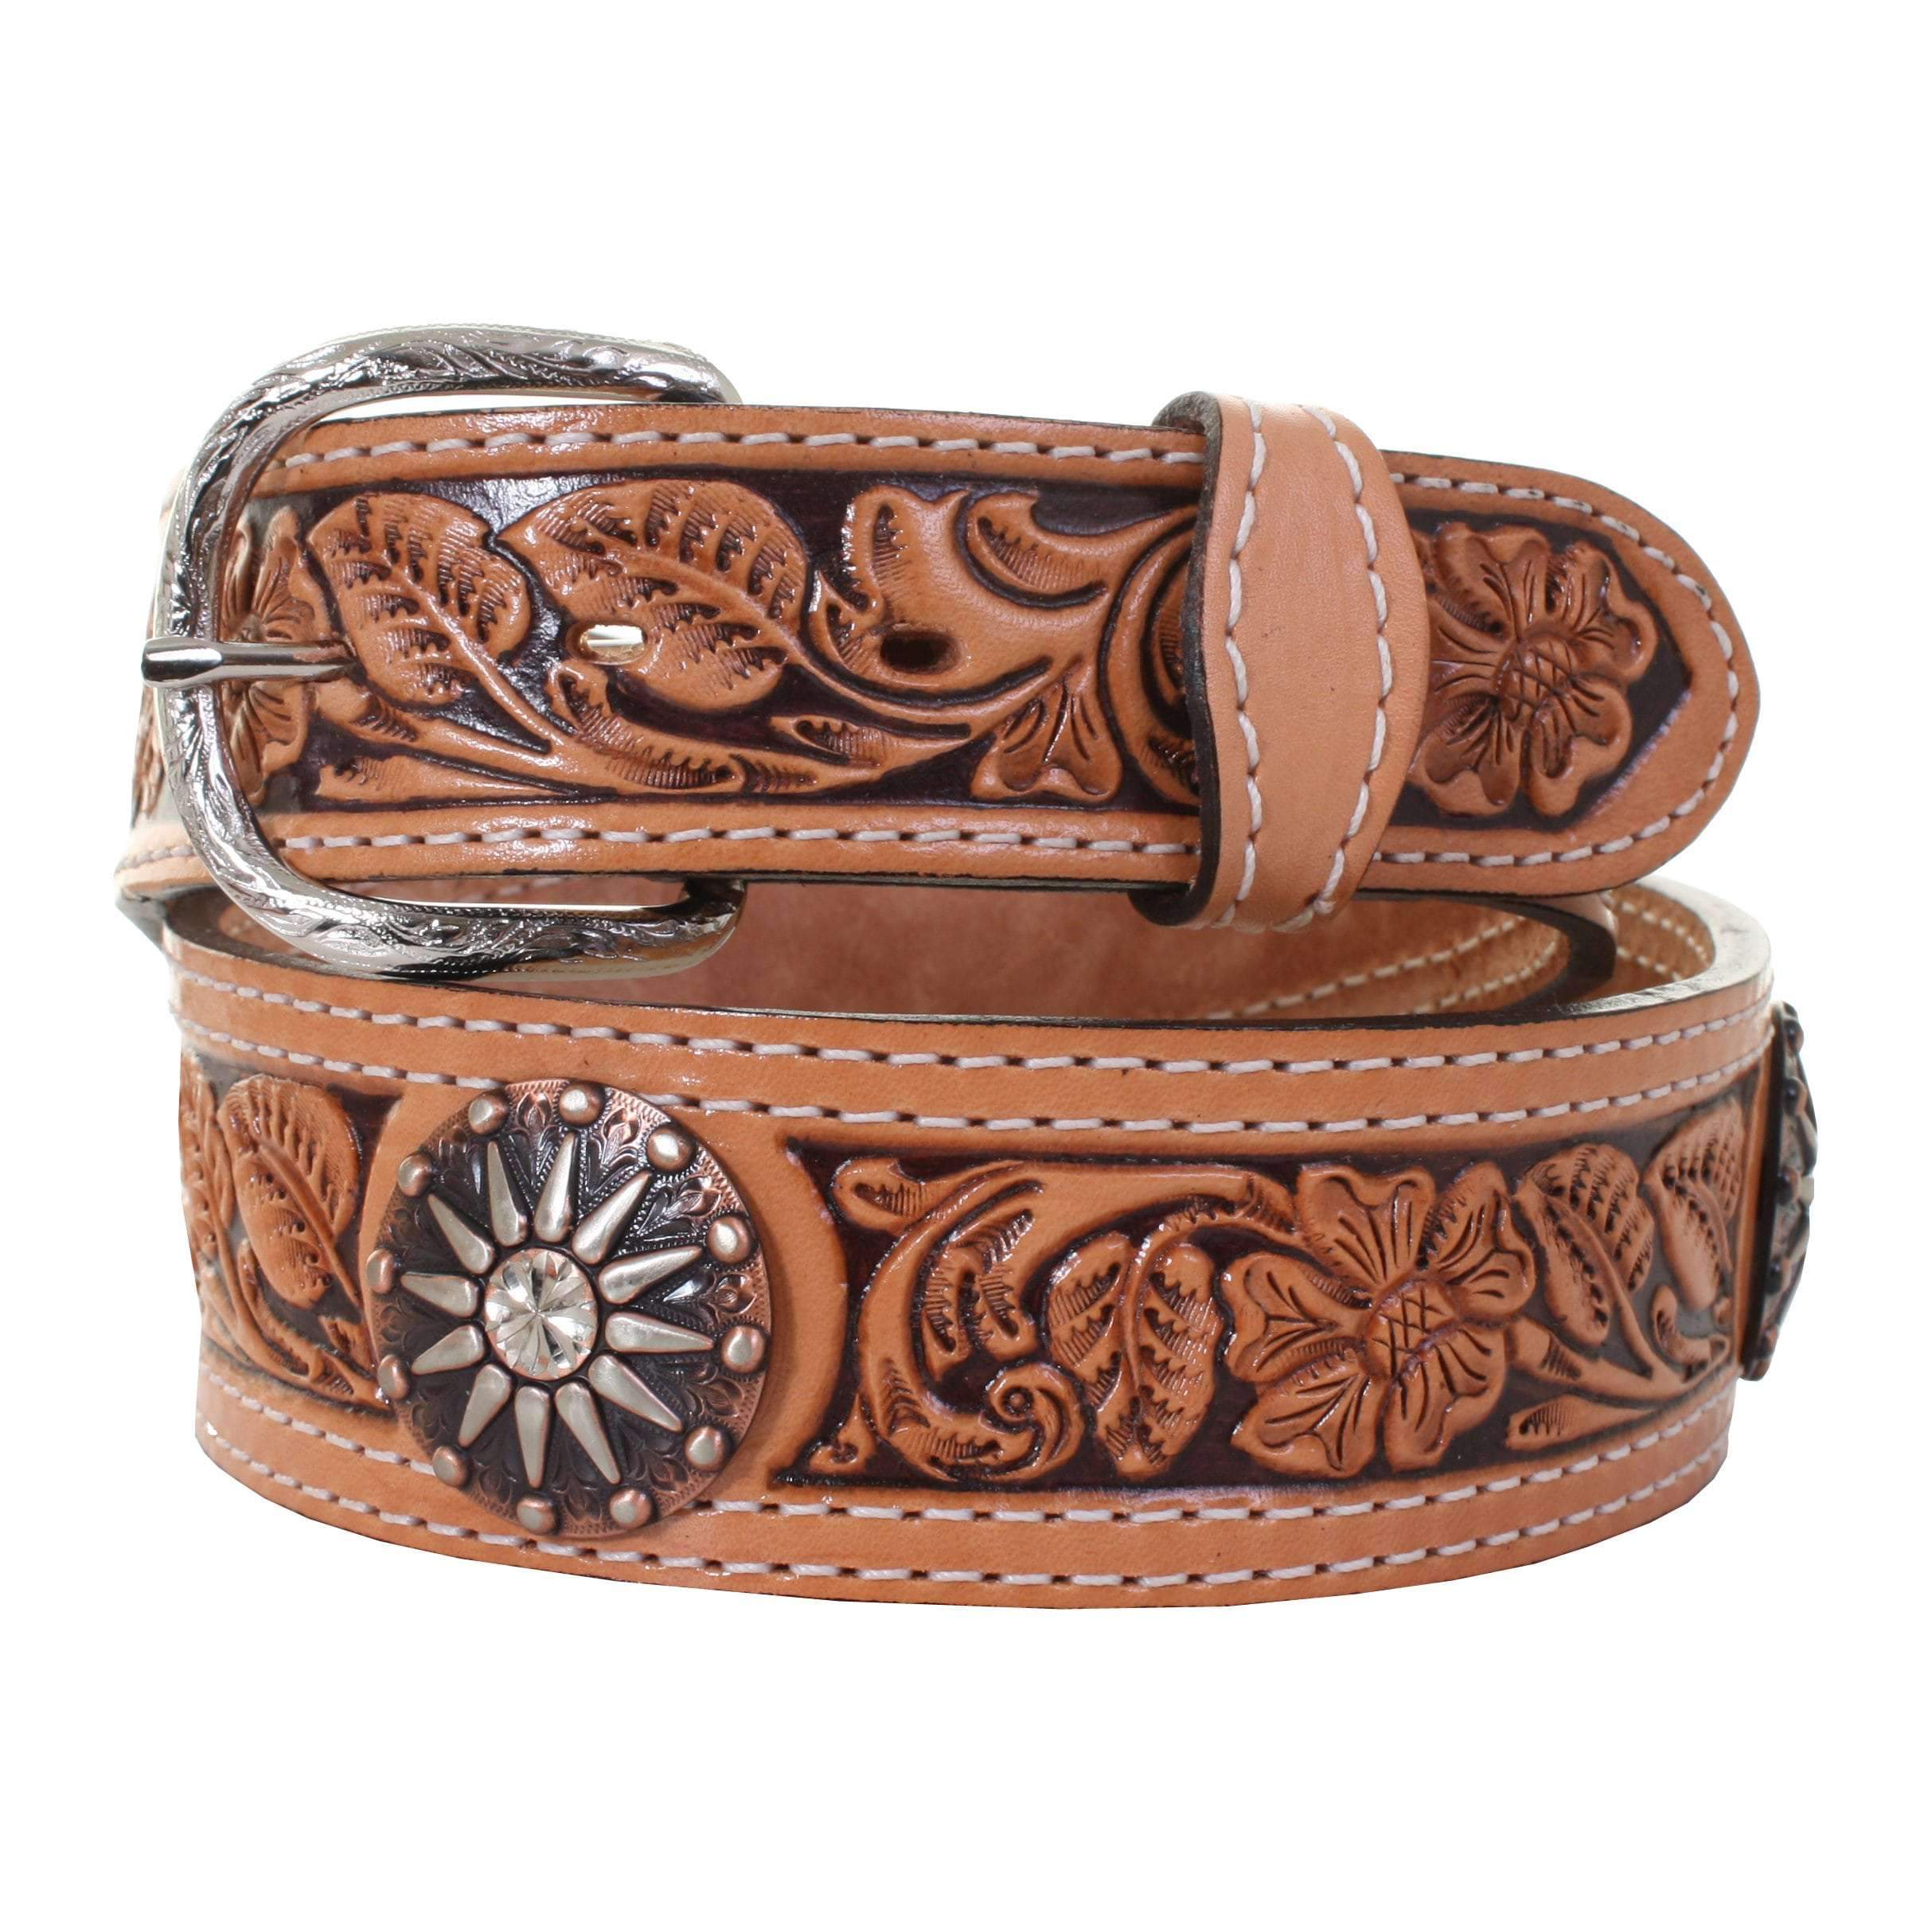 CLEARANCE - Natural Leather Tooled Belt - B927A - Double J Saddlery